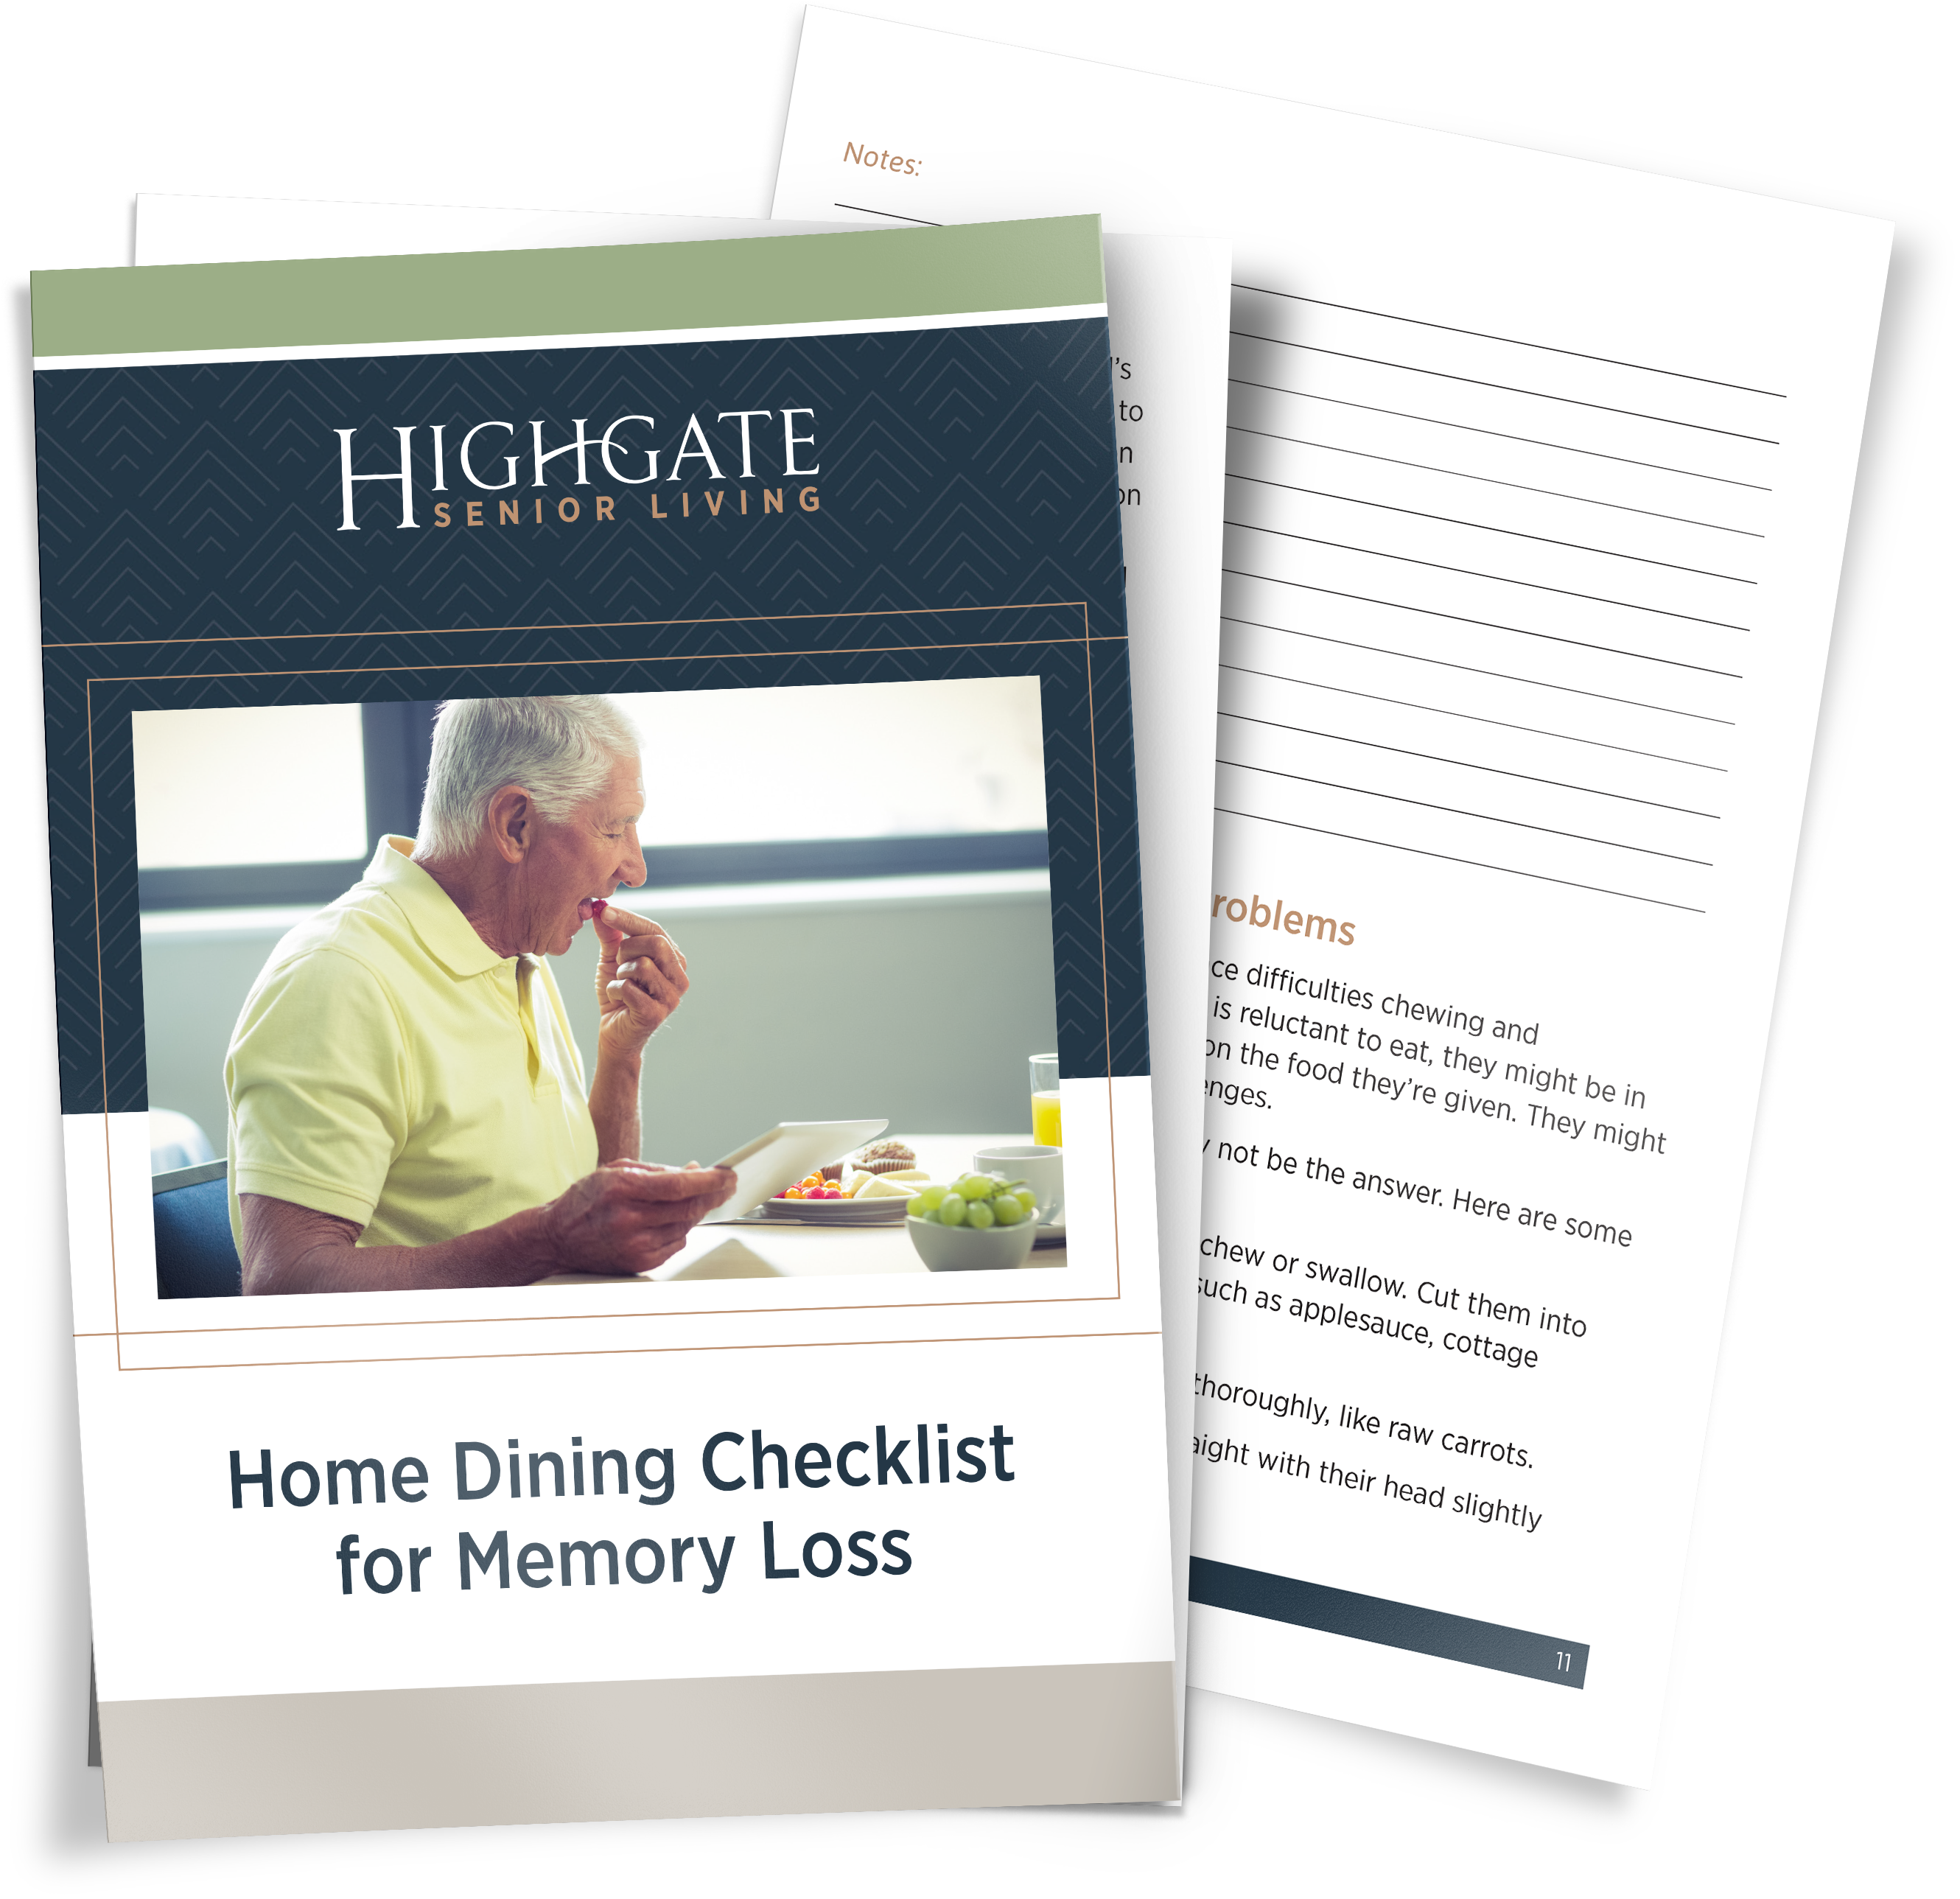 Home Dining Checklist for Memory Loss